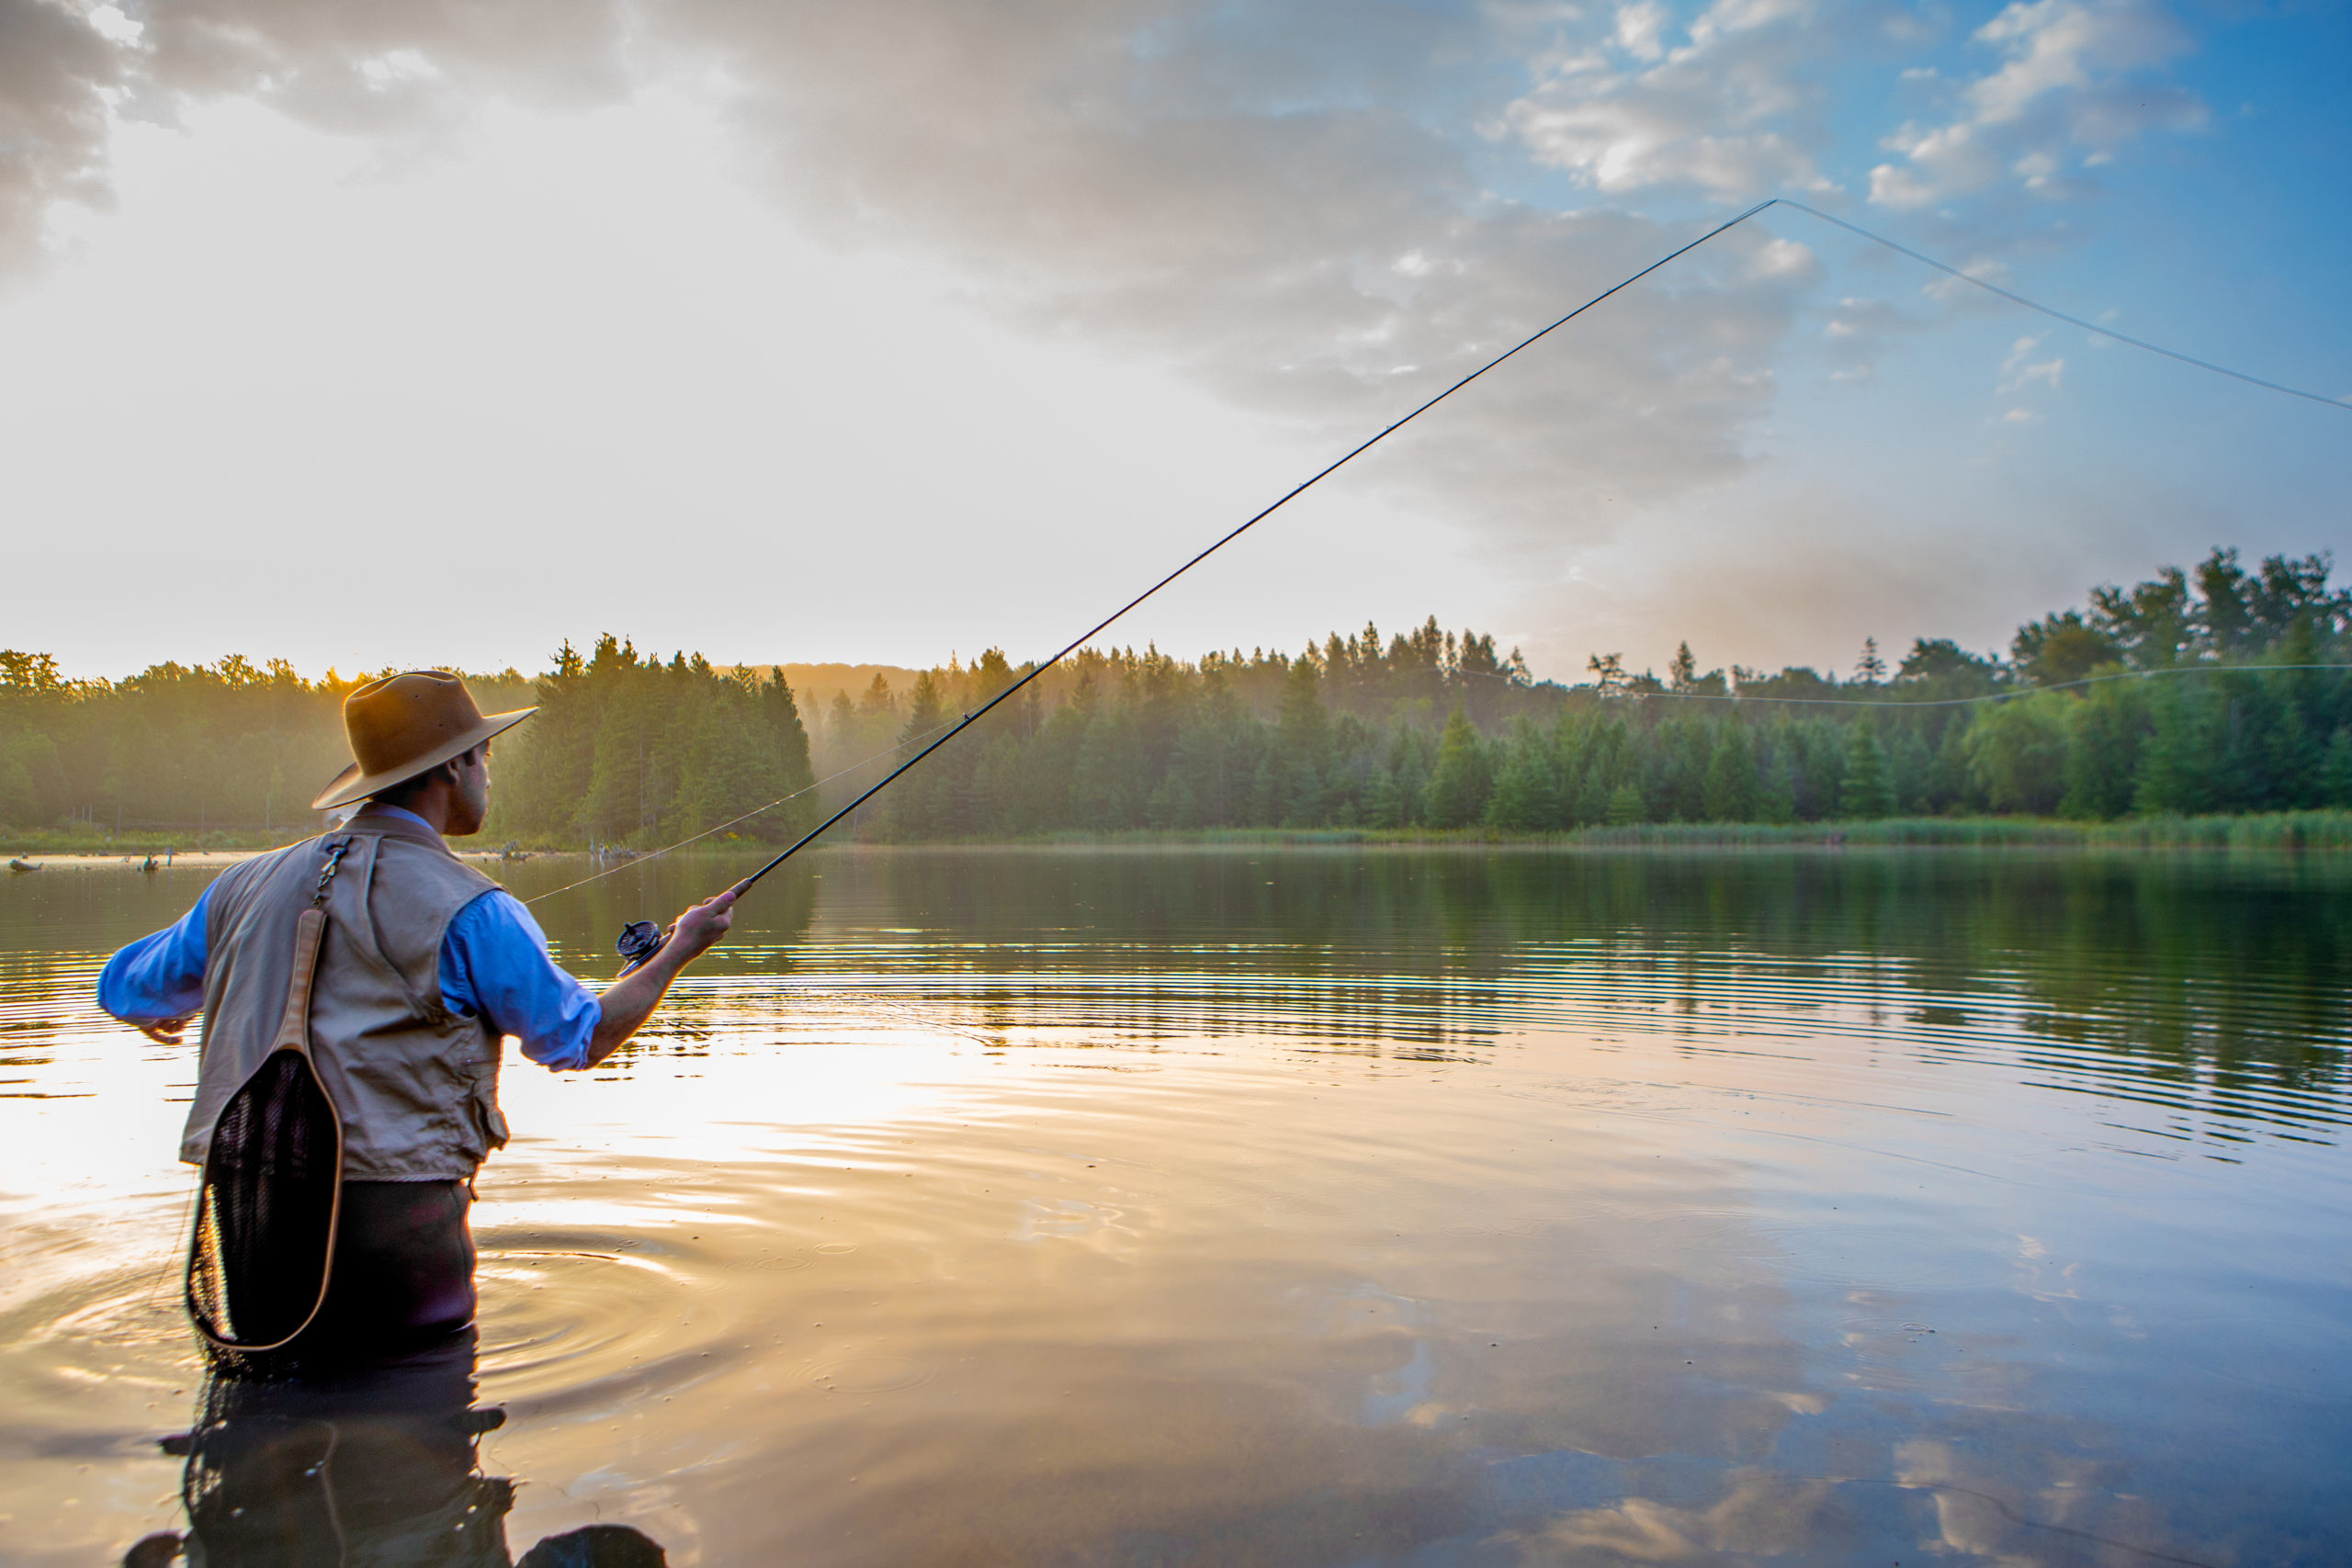 Get To Fishing In the Deschutes River And More